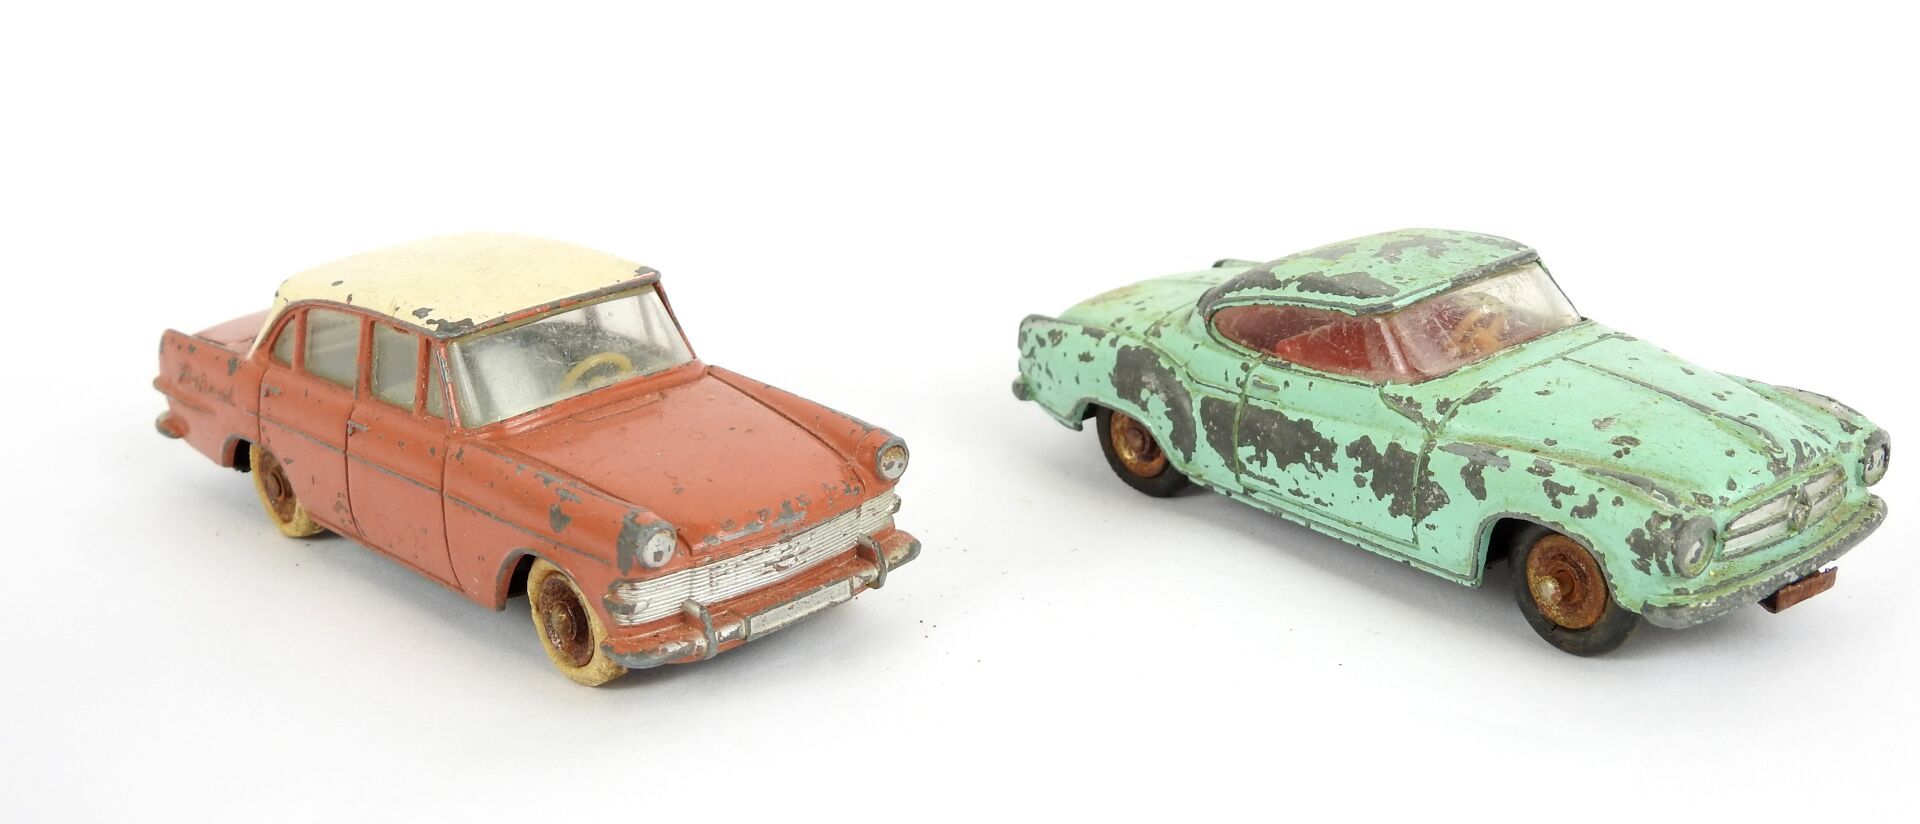 DINKY TOYS: Two miniature cars - Opel Rekord n°554 and B… | Drouot.com